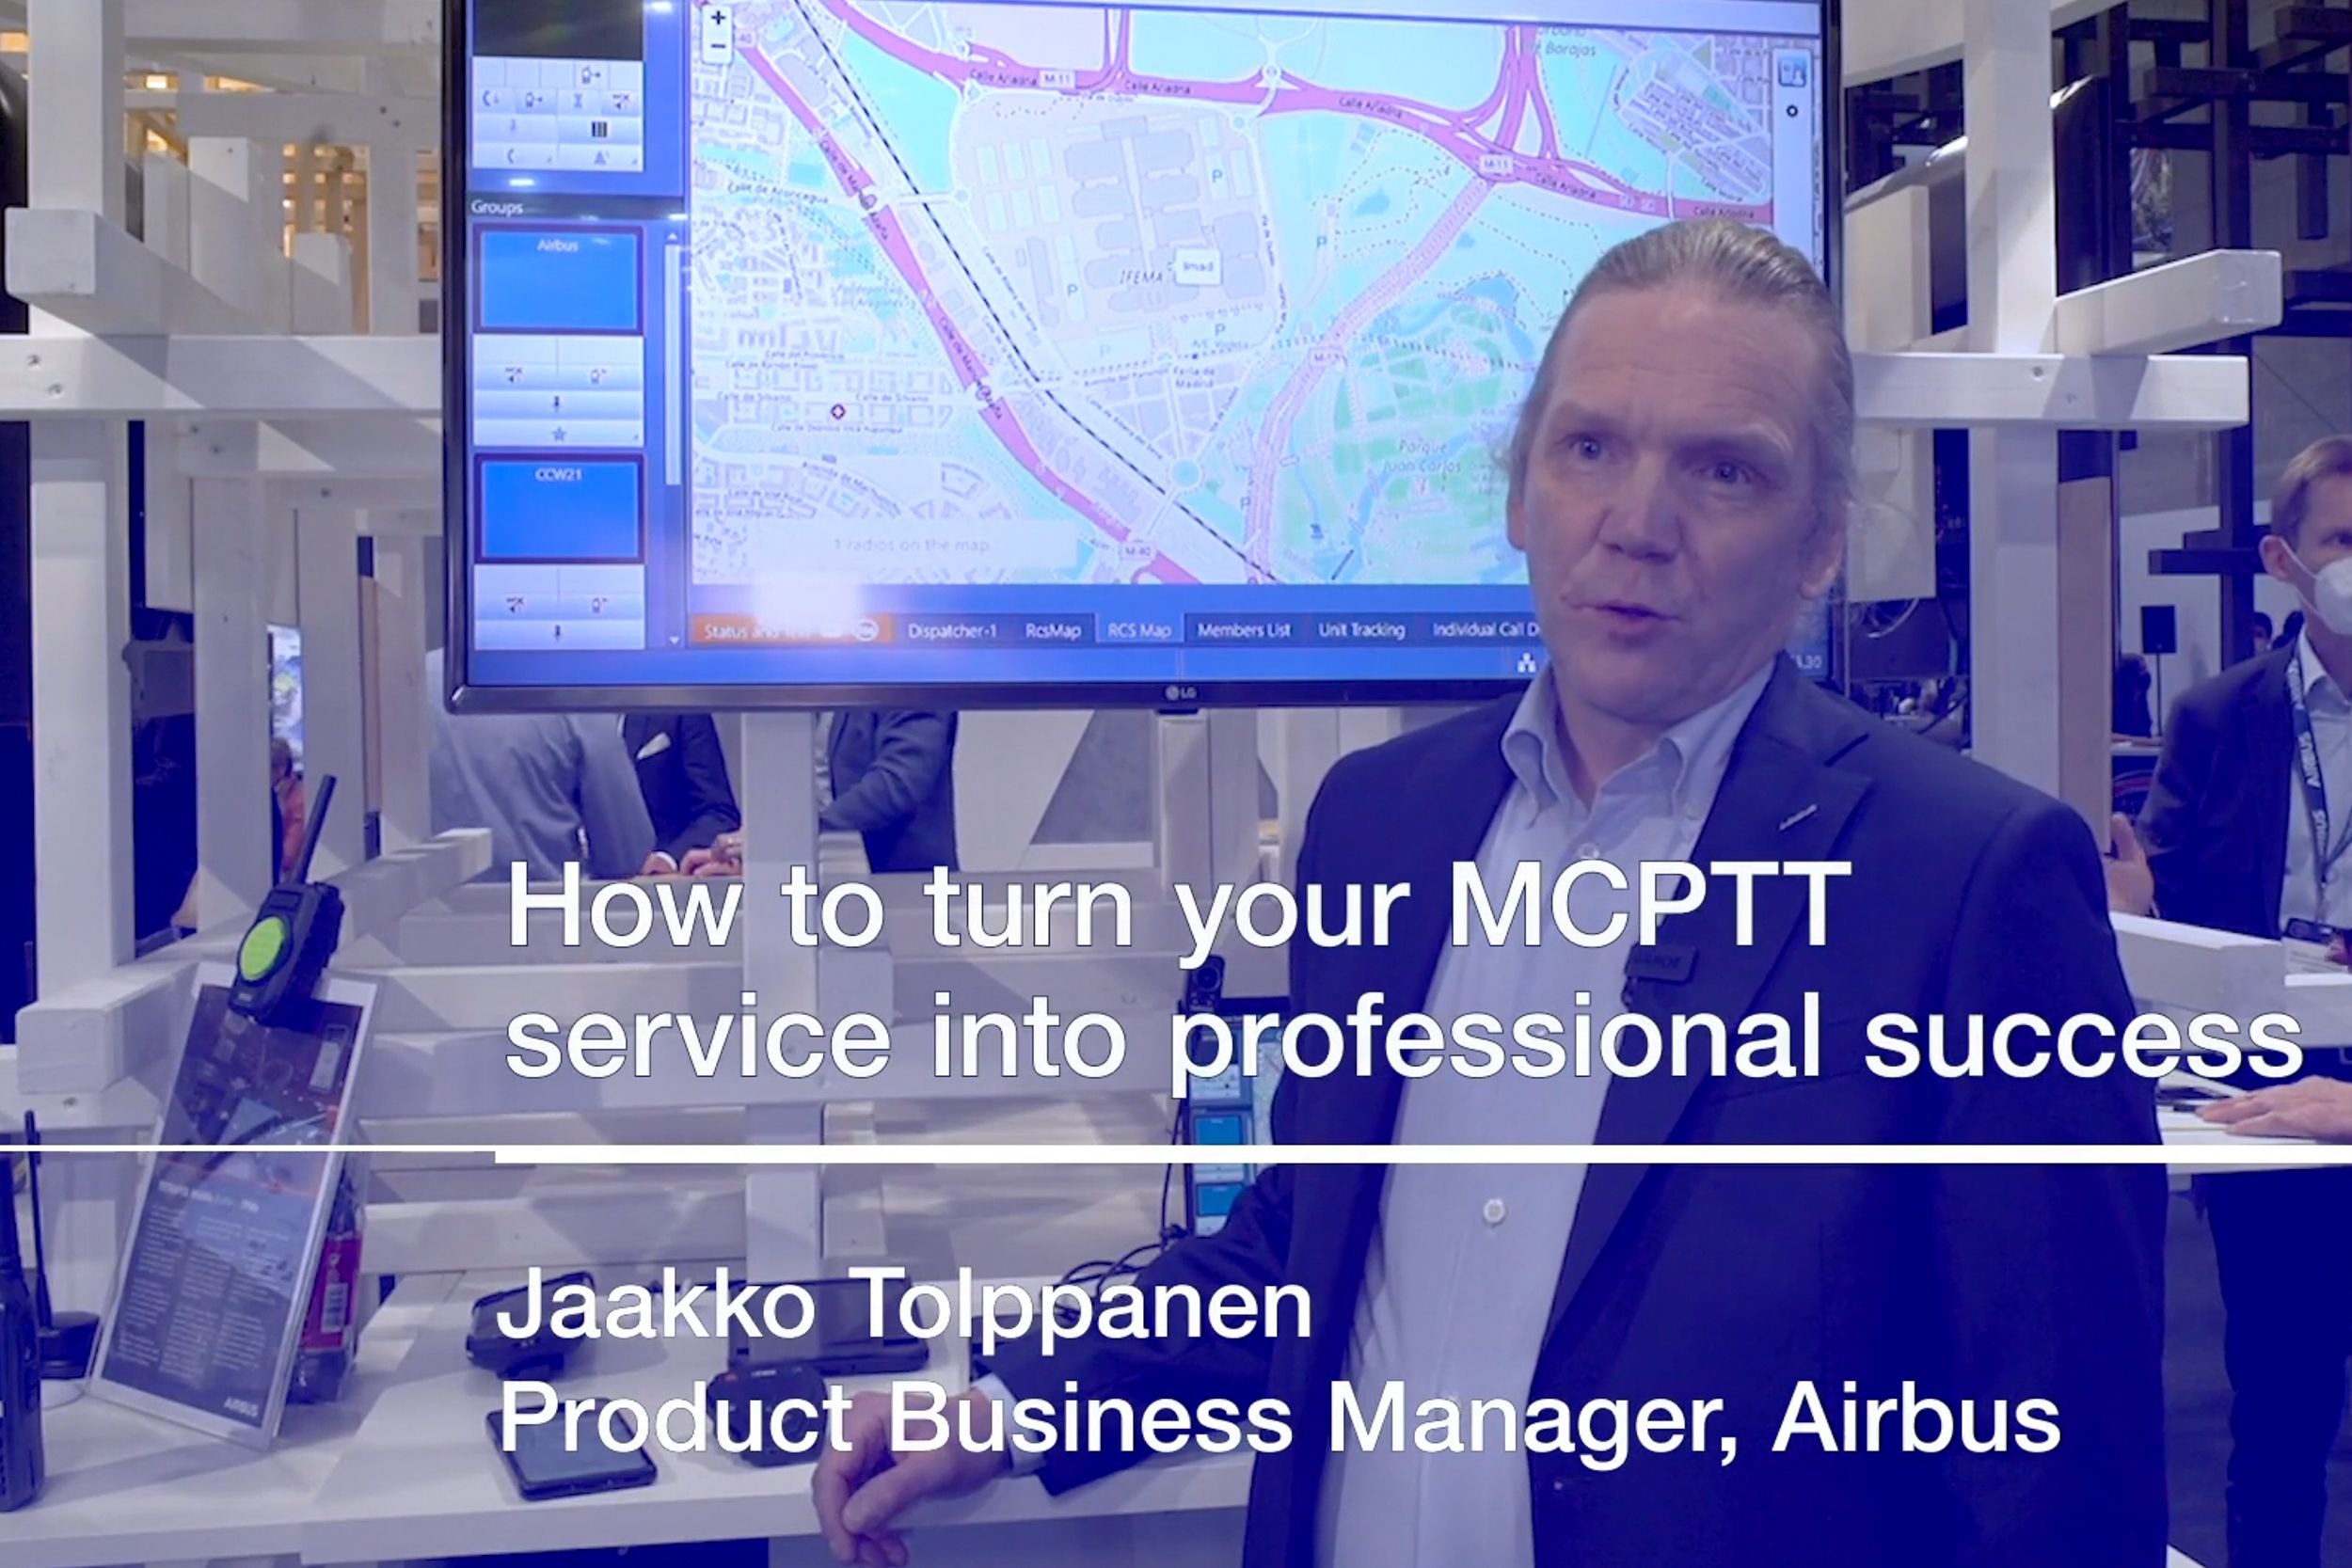 How to turn your MCPTT service into professional success